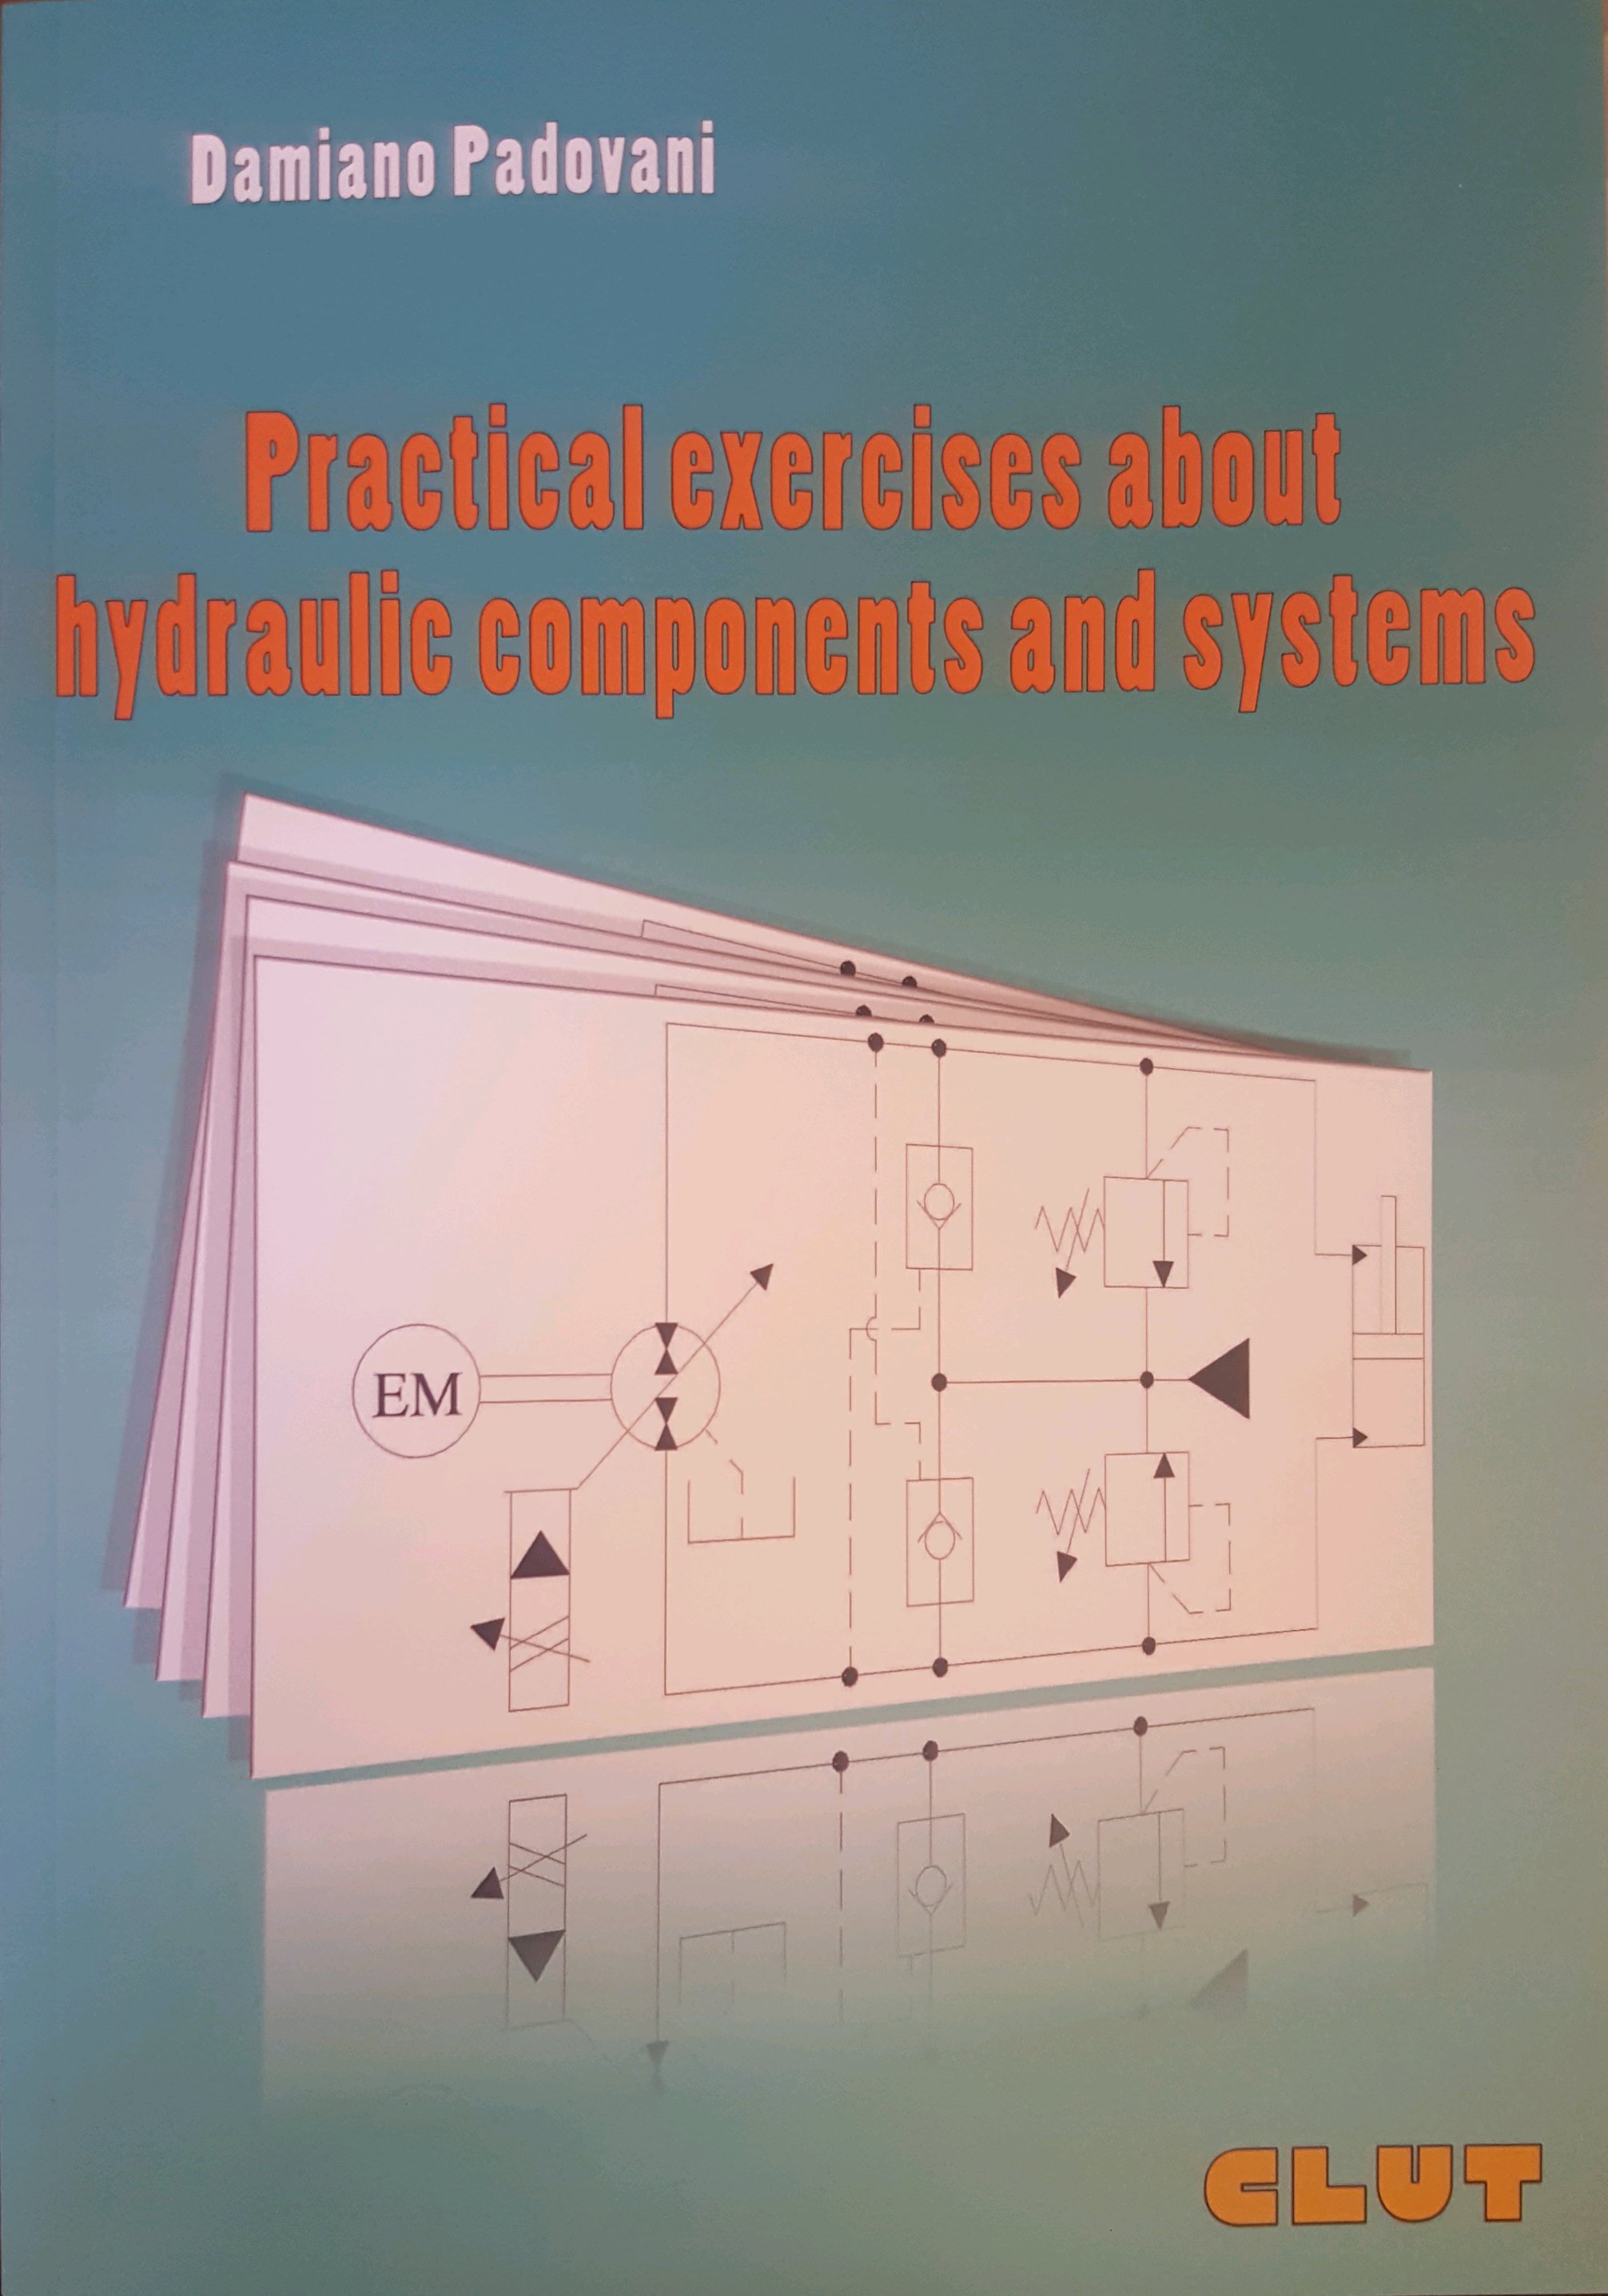 Practical exercises about hydraulic components and systems